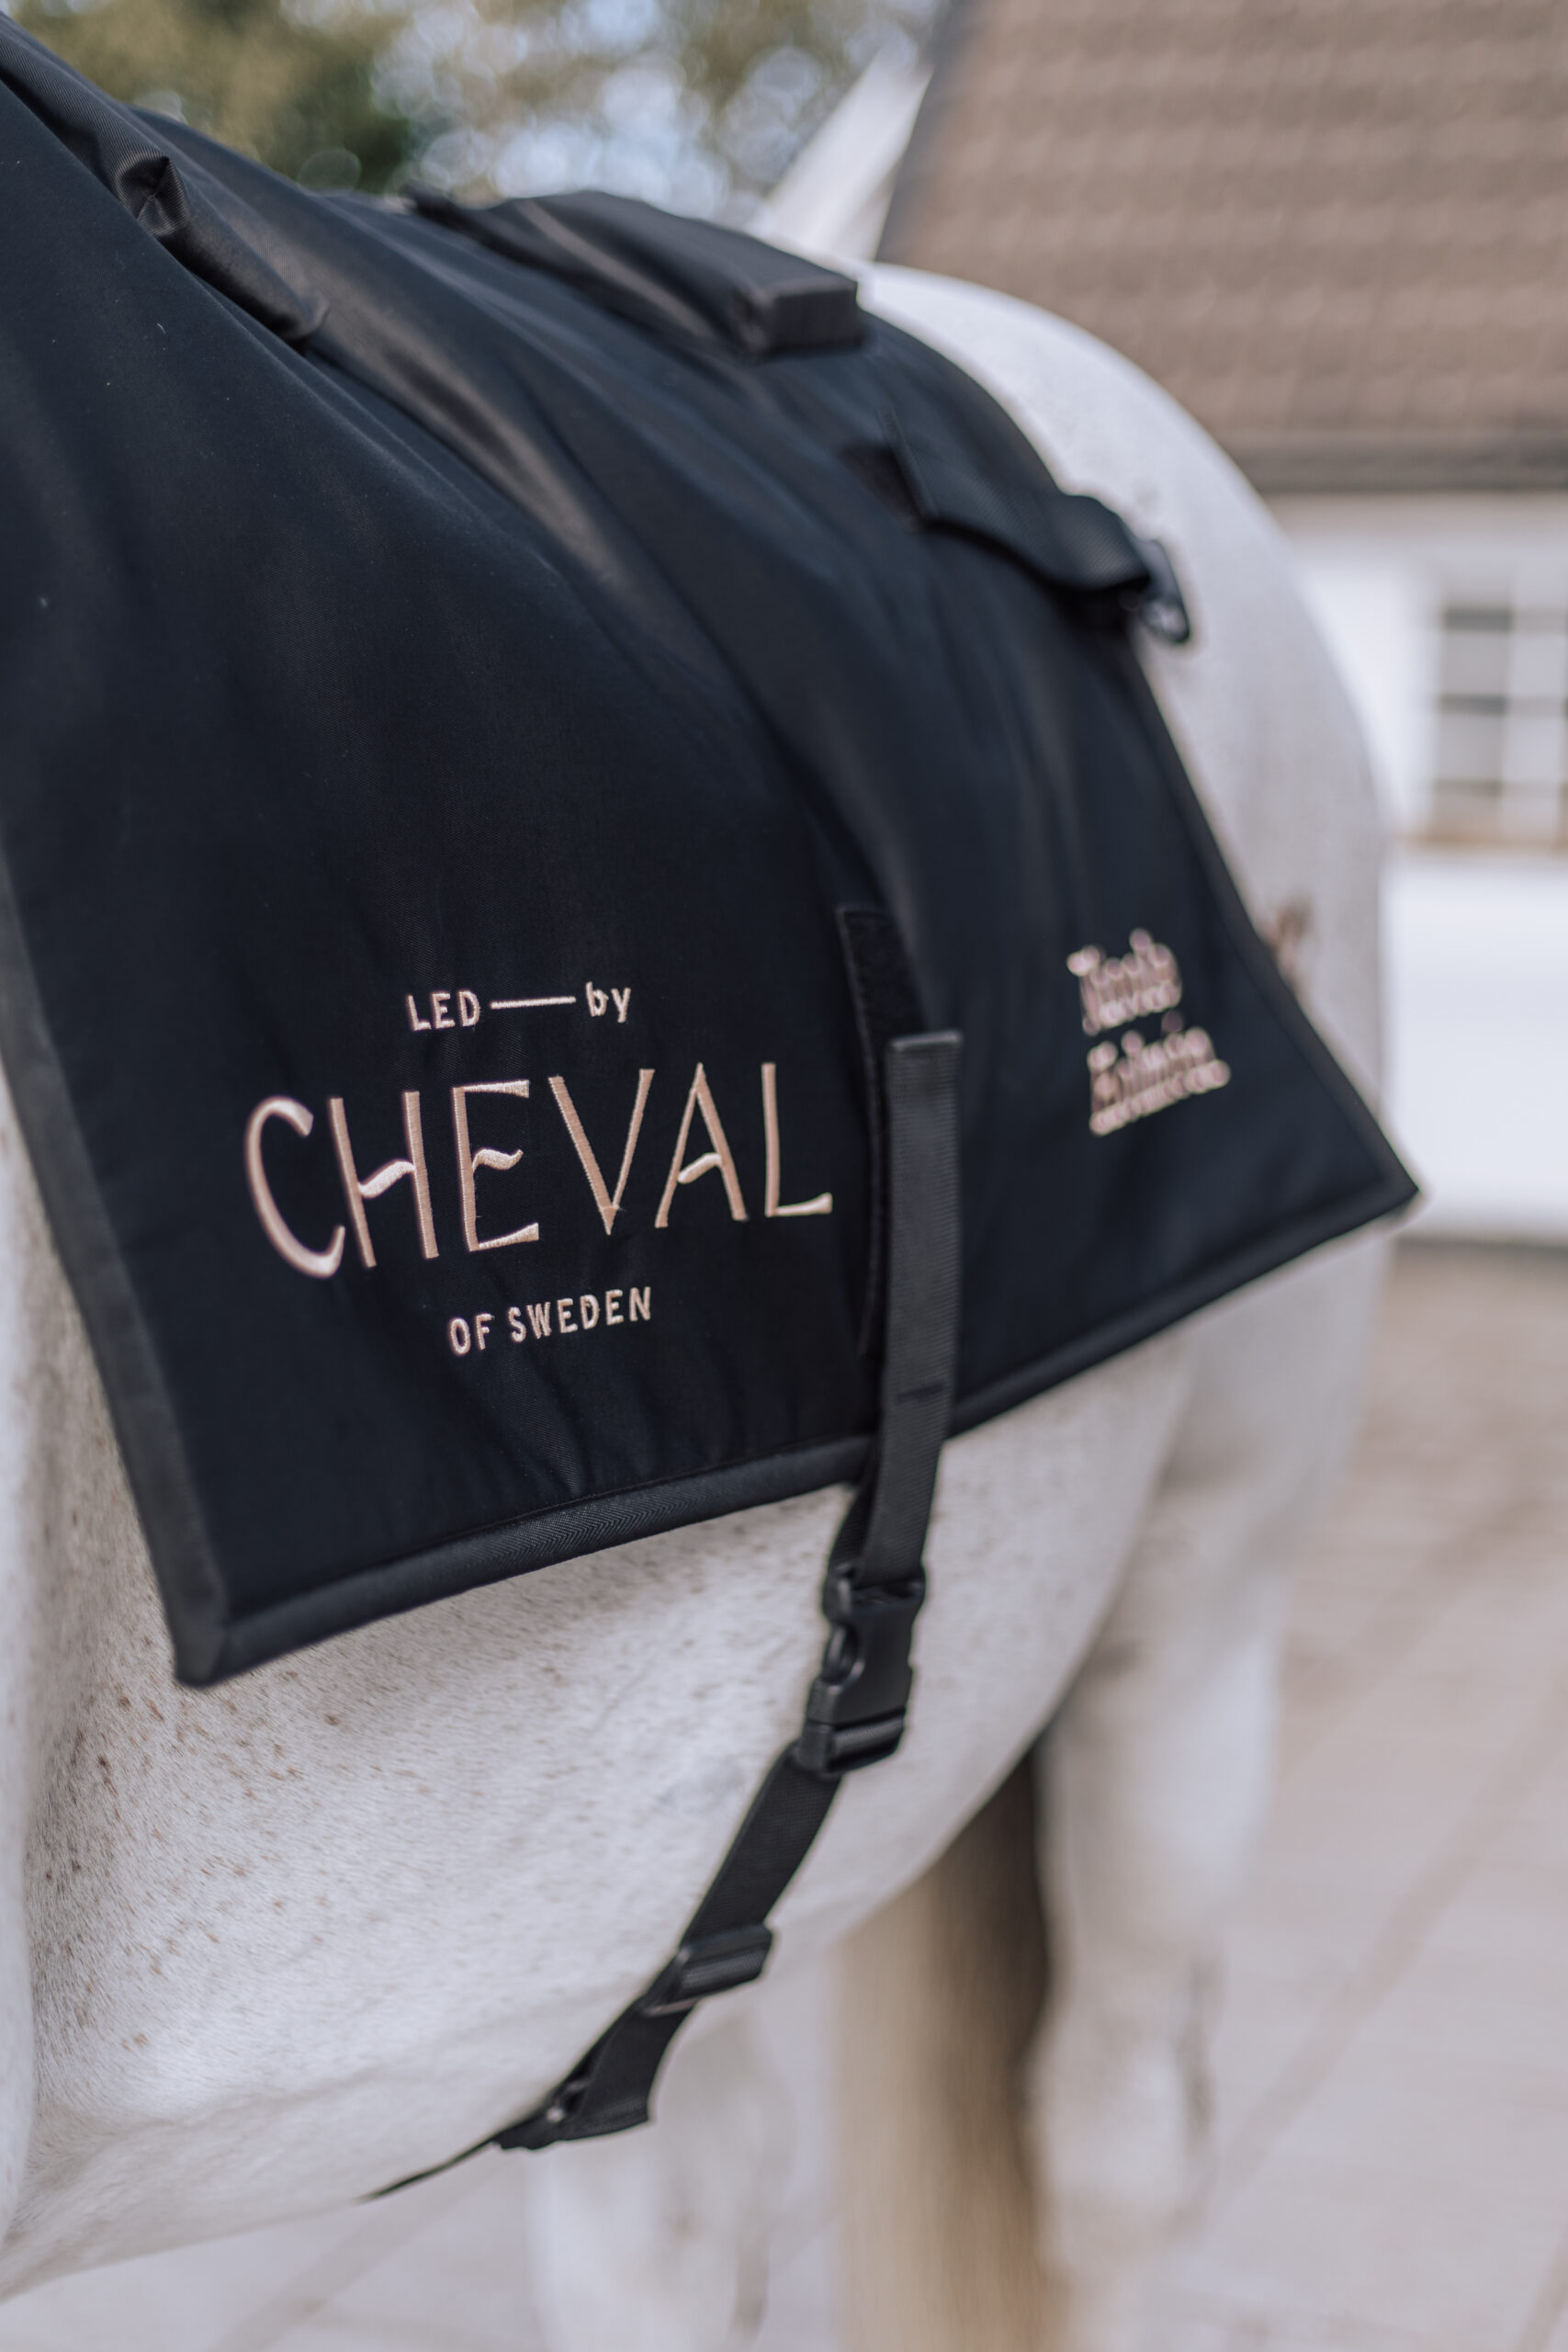 Contact Us - LED by CHEVAL